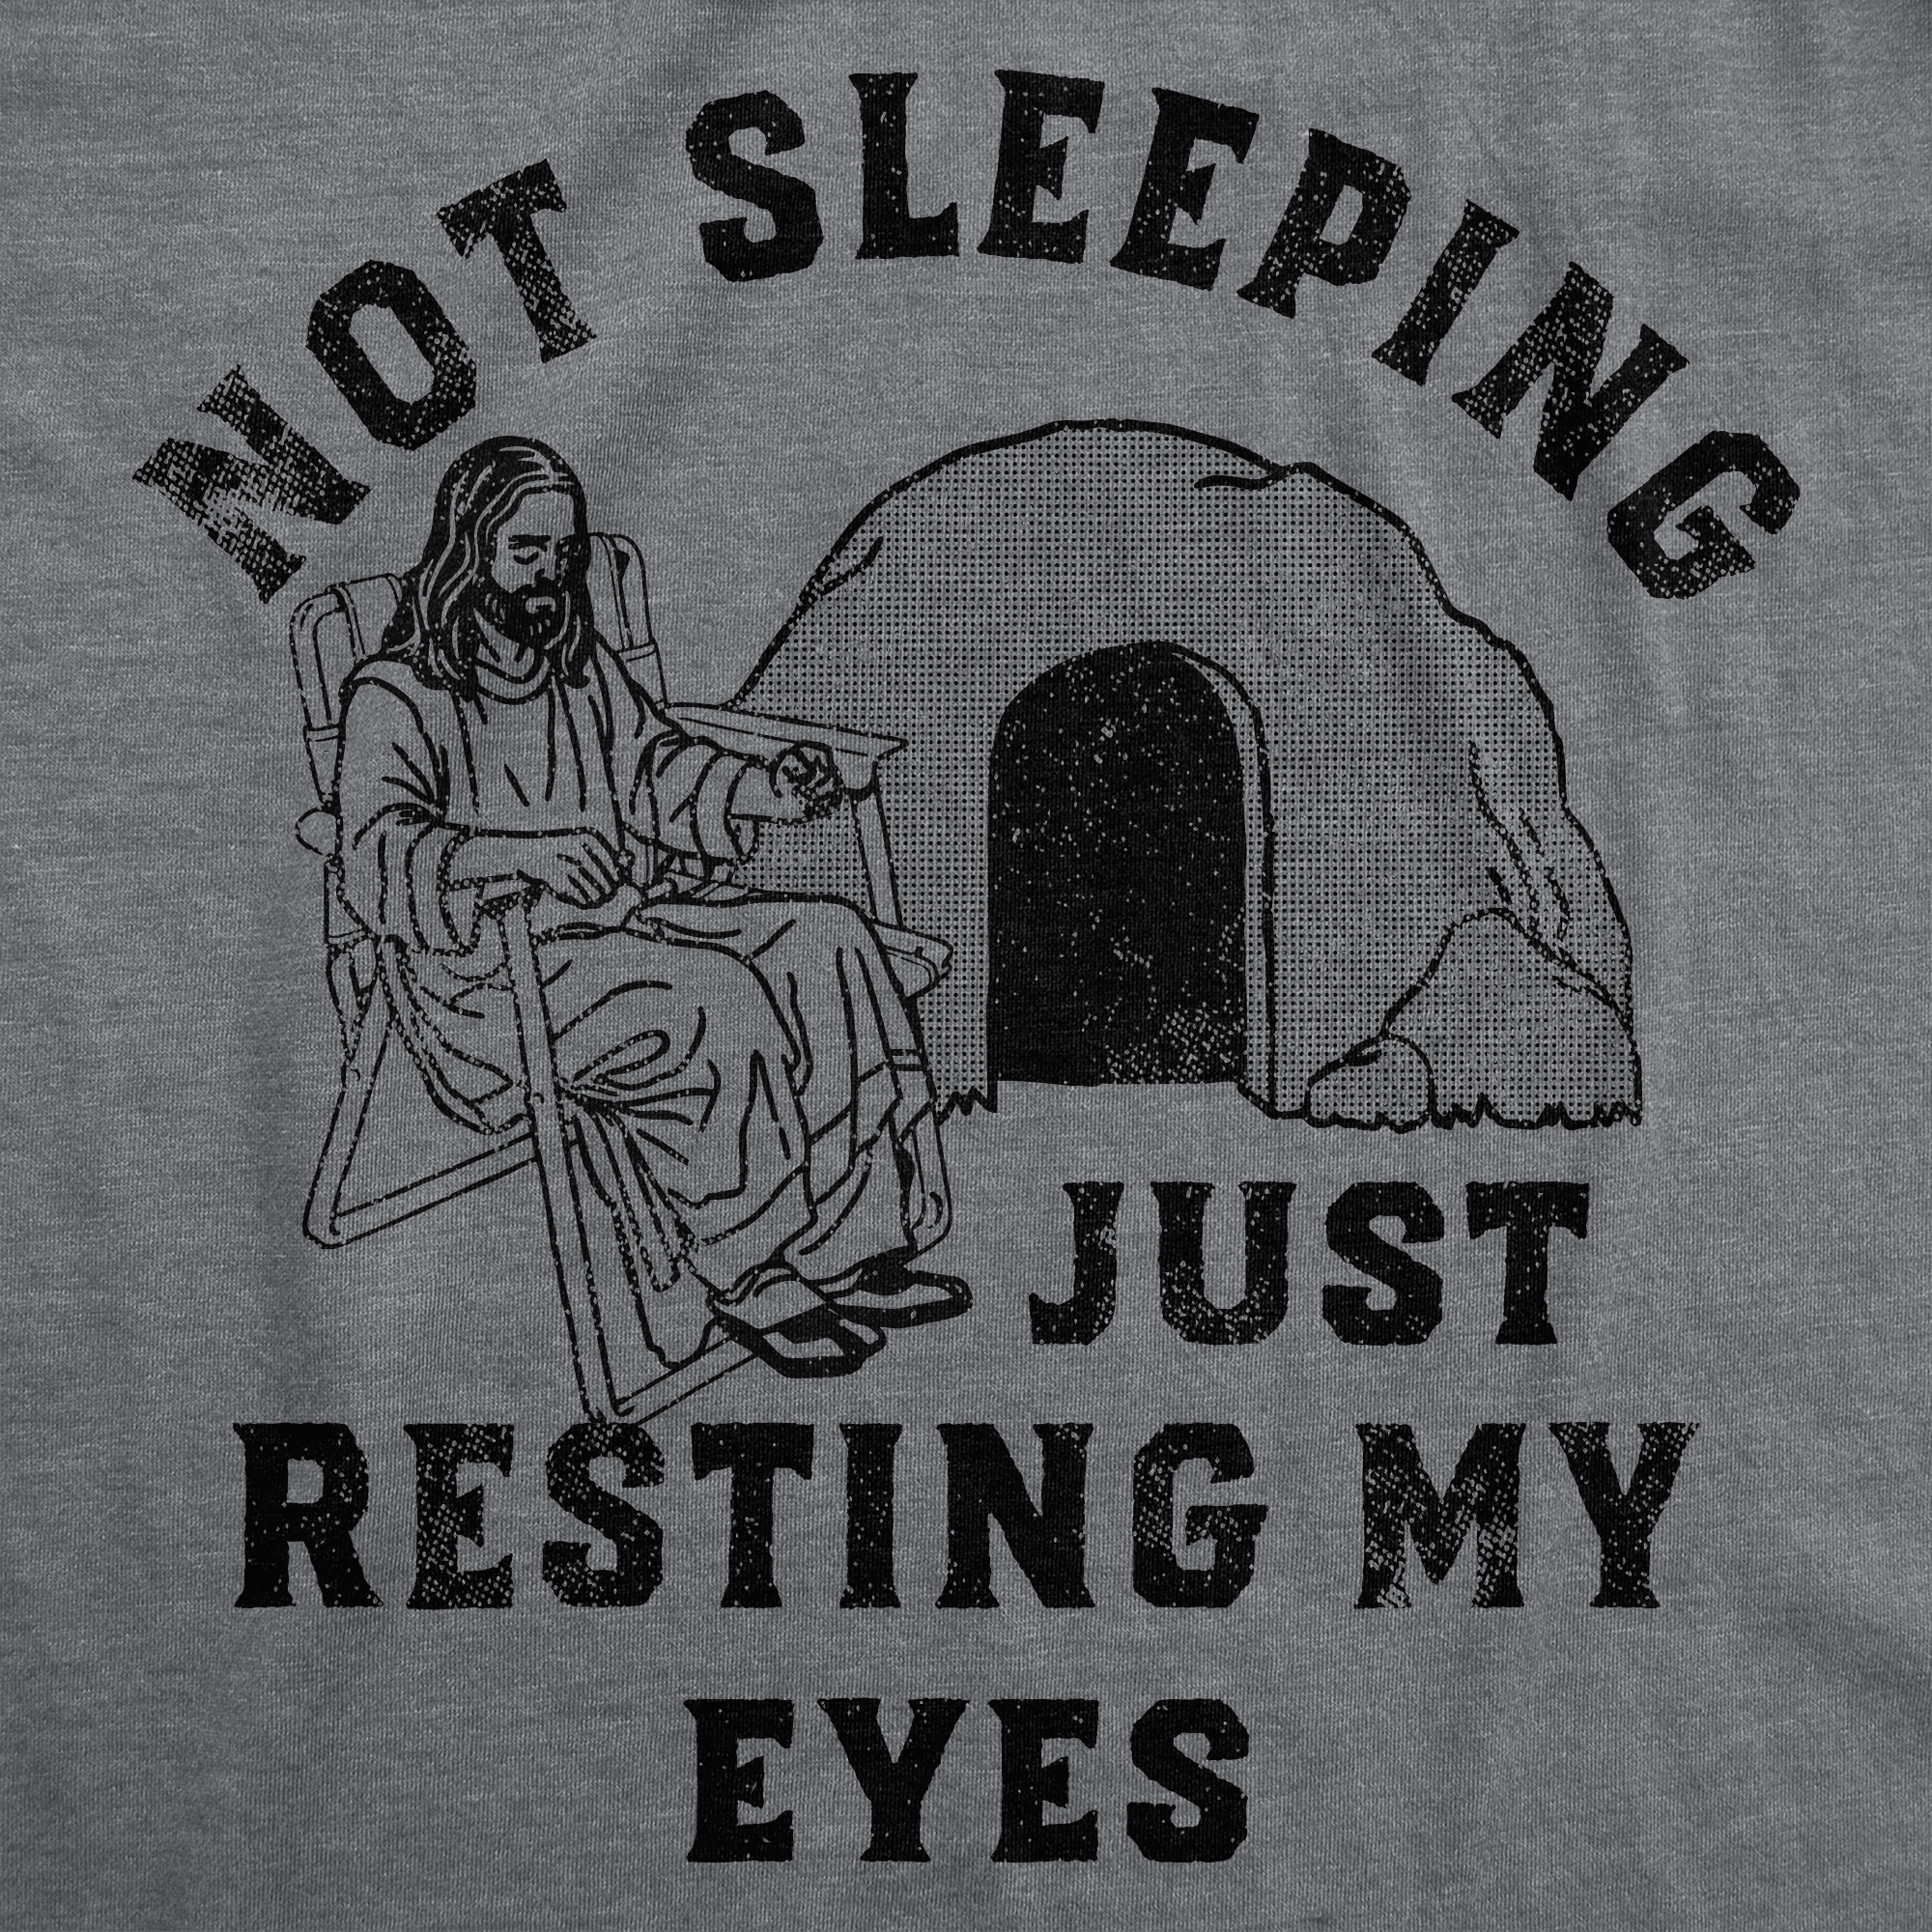 Funny Light Heather Grey - Not Sleeping Not Sleeping Just Resting My Eyes Mens T Shirt Nerdy Easter Sarcastic Tee